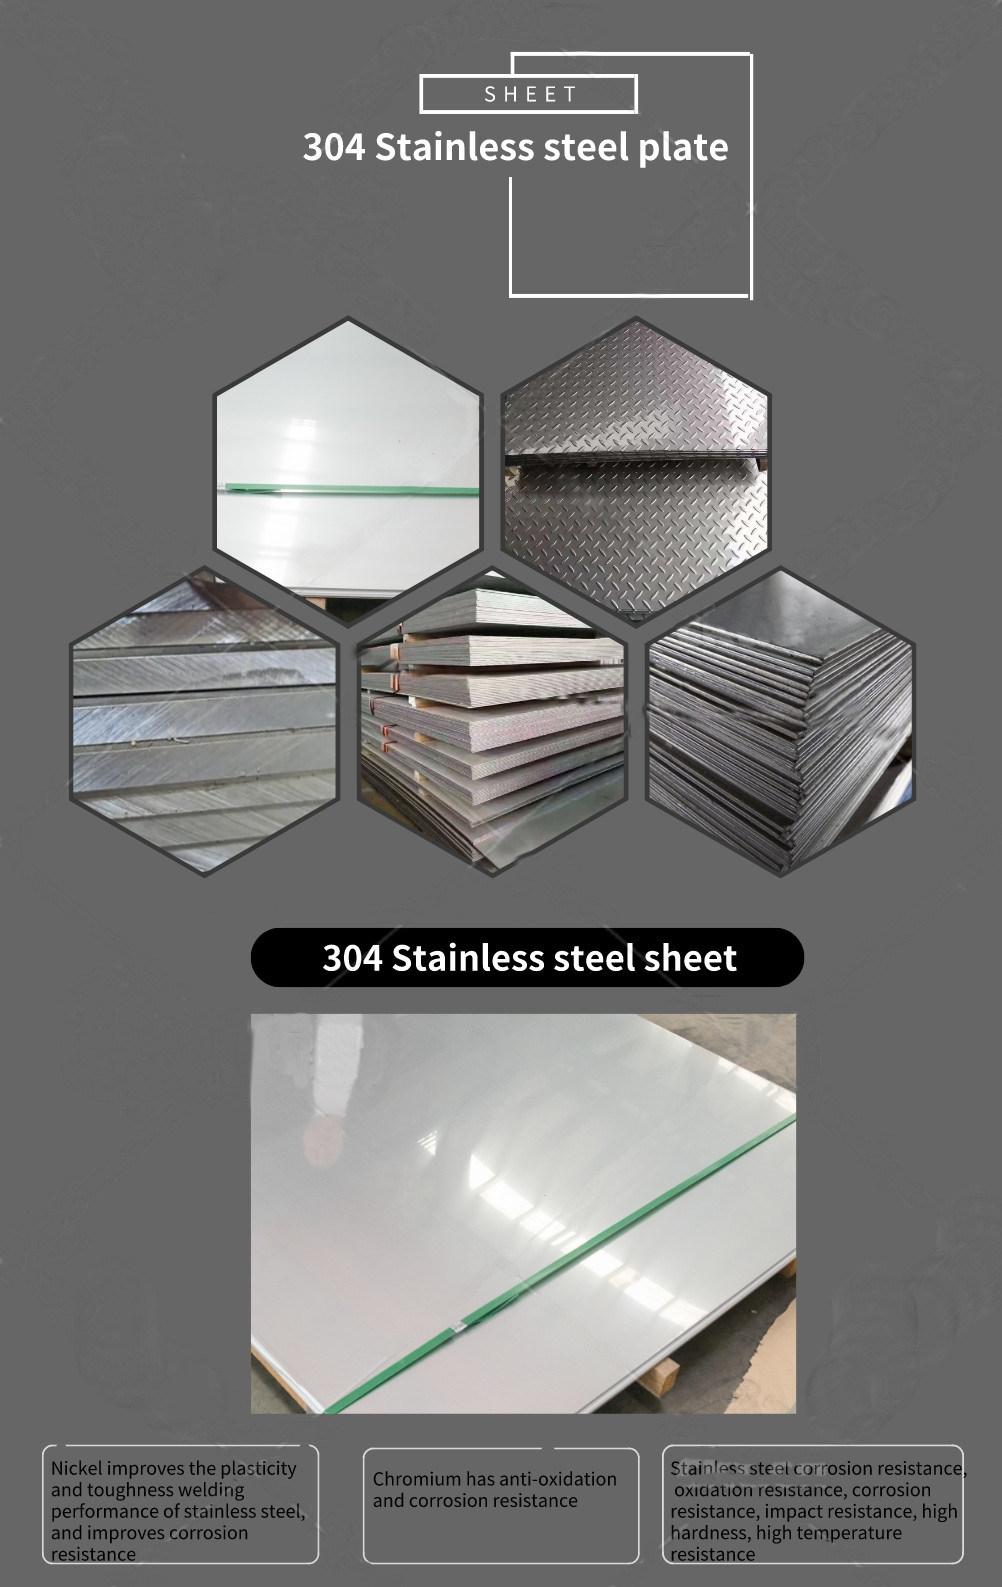 ASTM/GB/JIS 201 202 301 304 Hot Rolled Stainless Steel Plate for Boat Board